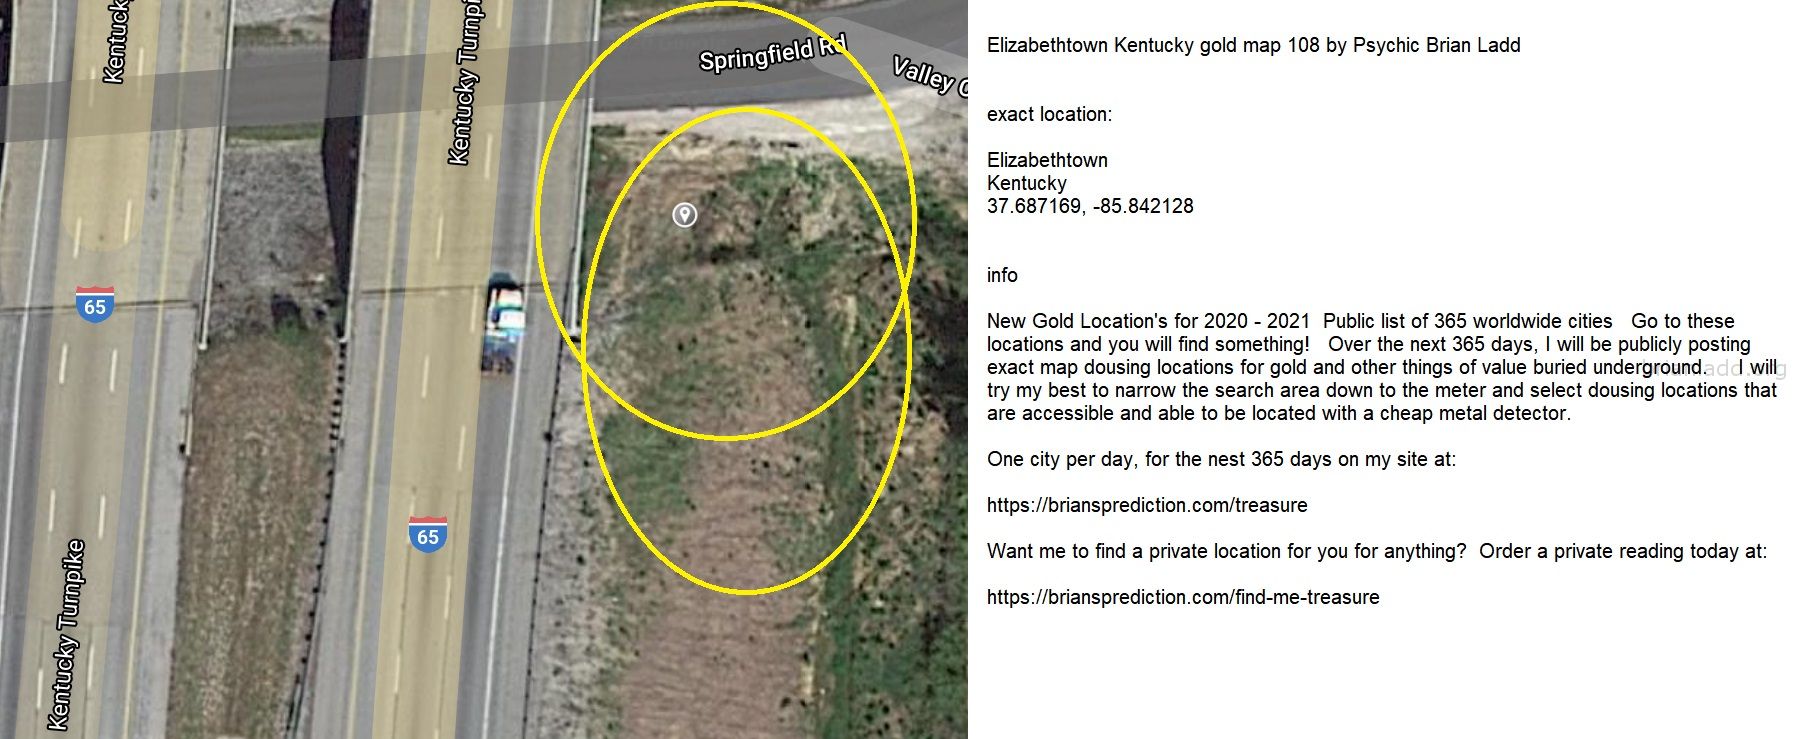 Elizabethtown Kentucky gold map 108 by Psychic Brian Ladd
New Gold Location's for 2020 - 2021  Public list of 365 worldwide cities   Go to these locations and you will find something!   Over the next 365 days, I will be publicly posting exact map dousing locations for gold and other things of value buried underground.     I will try my best to narrow the search area down to the meter and select dousing locations that are accessible and able to be located with a cheap metal detector. One city per day, for the nest 365 days on my site at:  https://briansprediction.com/treasure  Want me to find a private location for you for anything?  Order a private reading today at:  https://briansprediction.com/find-me-treasure
